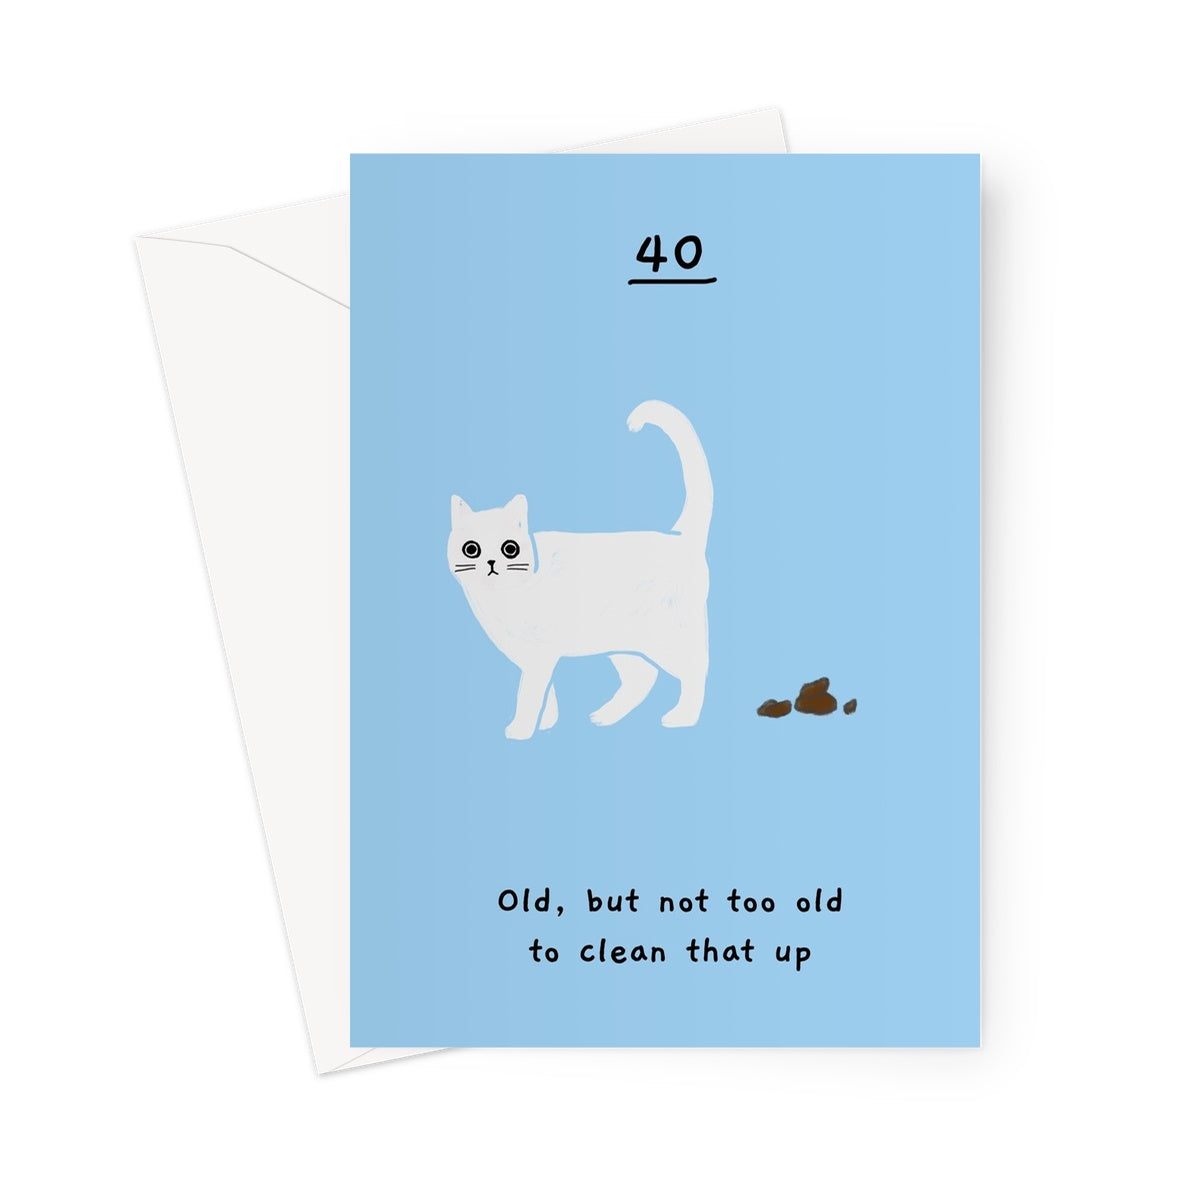 Ken the cat funny 40th birthday card in blue - old, but not too old 